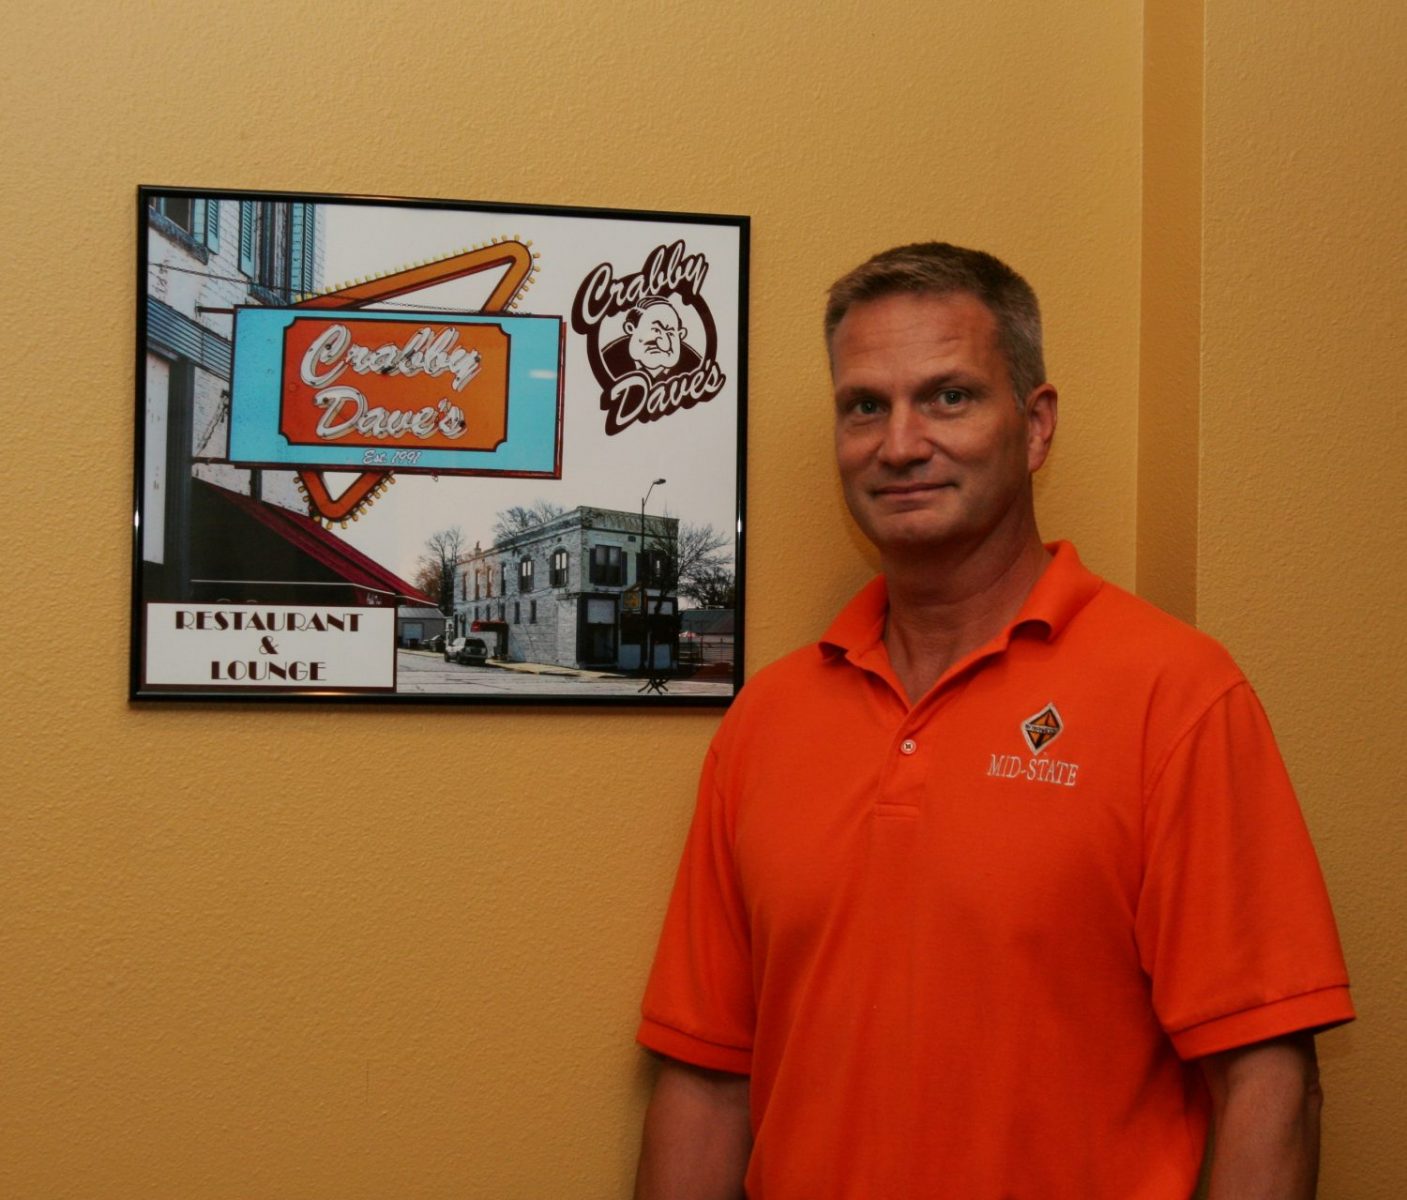 Tim Tolppi, pictured, and his girlfriend Kris Dodge are the new owners of Crabby Dave’s.